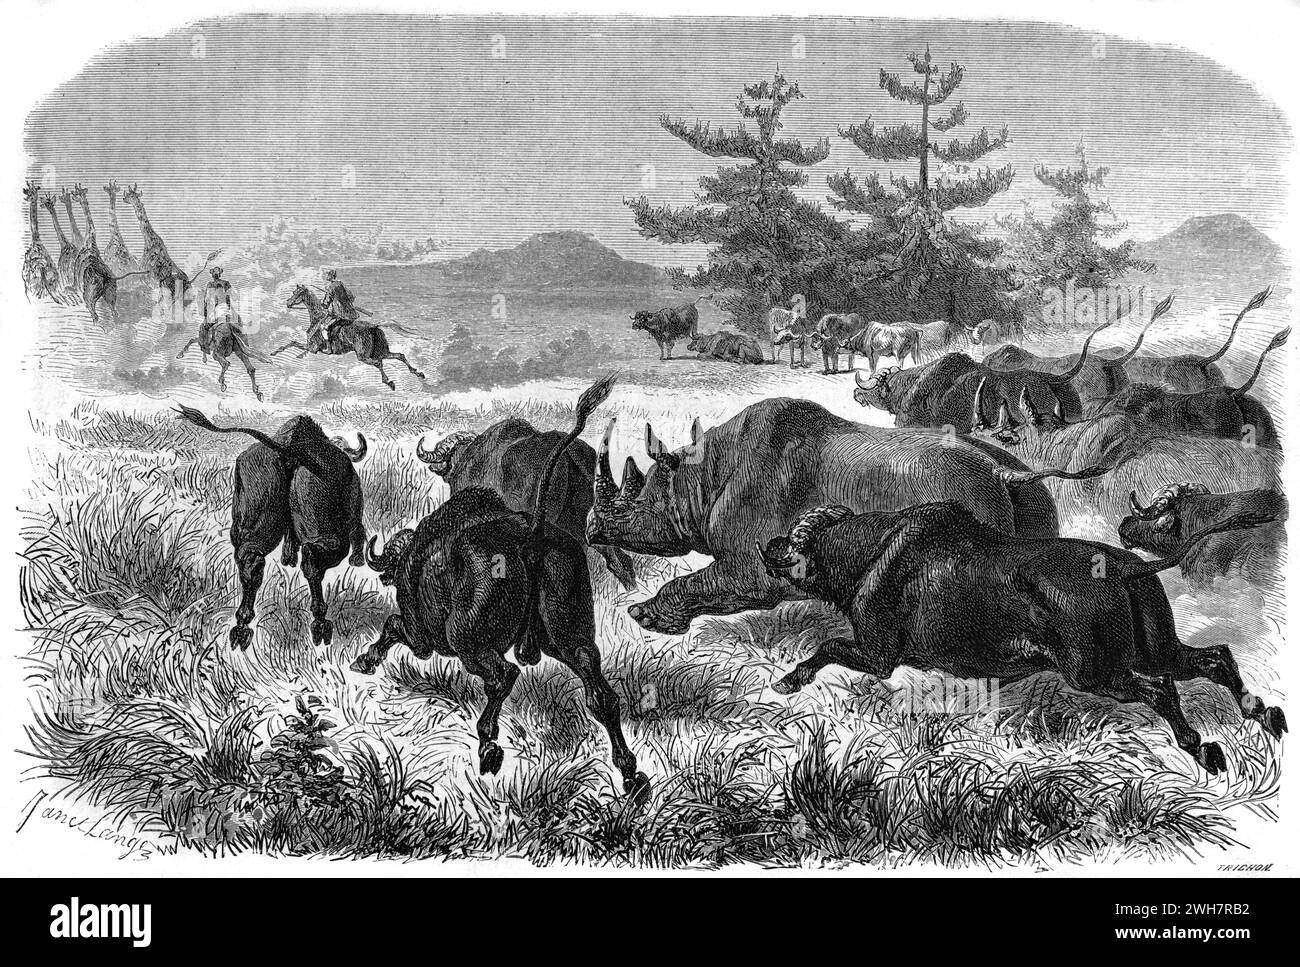 Buffalo and Rhinos or Rhinoceros Turn on Big Game Hunters on a Big Game Hunt in South Africa. Vintage or Historic Engraving or Illustration 1863 Stock Photo